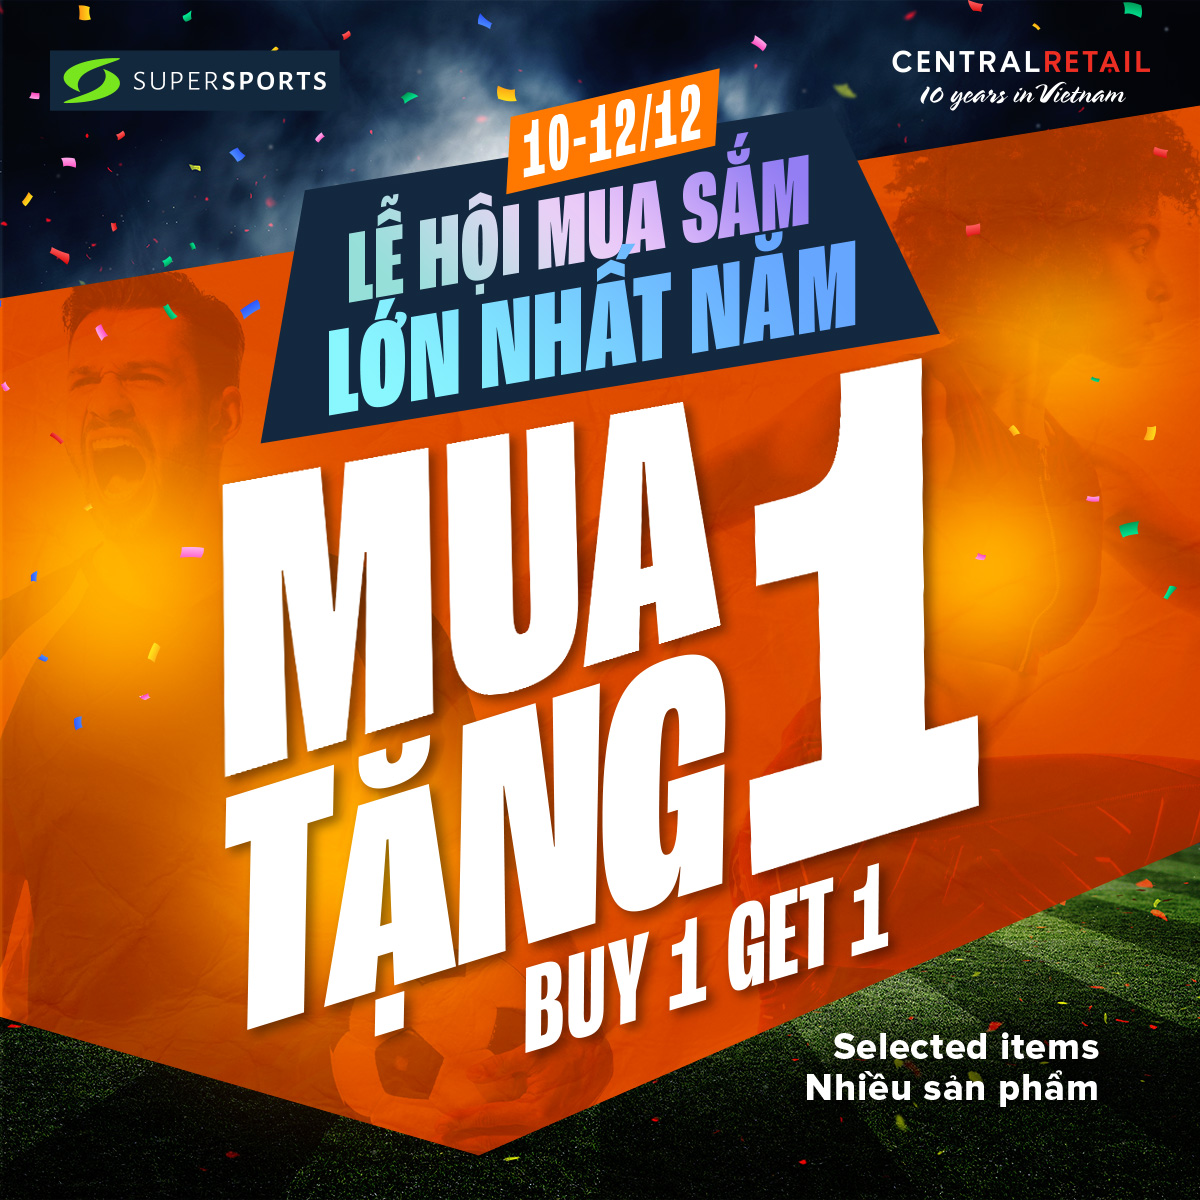 SUPERSPORTS BUY 1 GET 1 FREE, GOOD DEAL FINDING NOW!